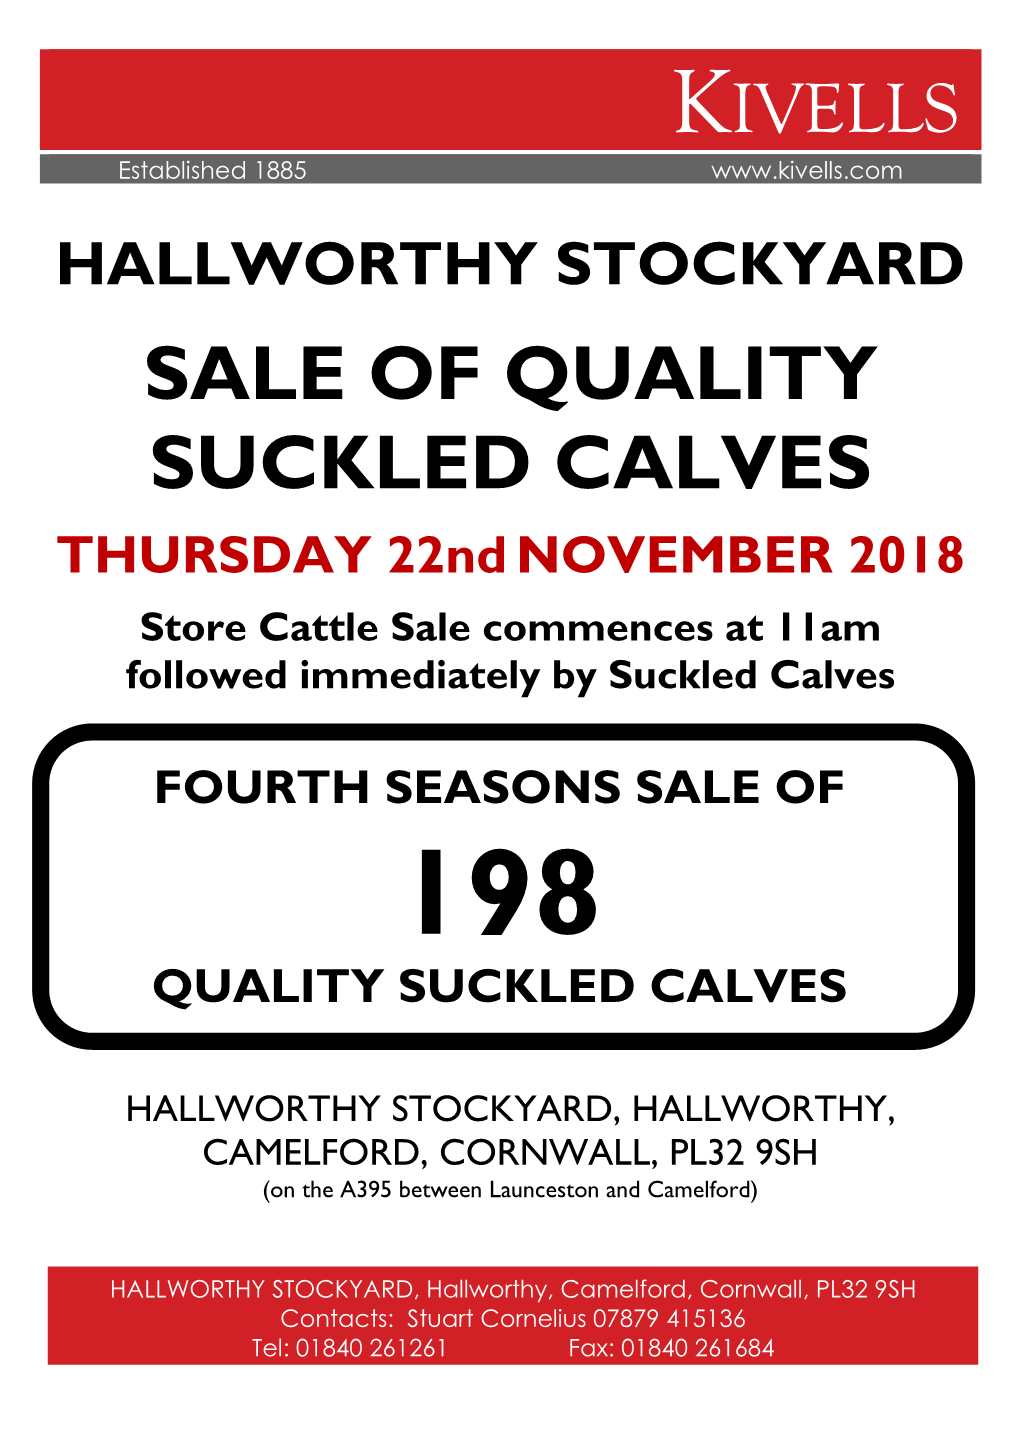 Sale of Quality Suckled Calves